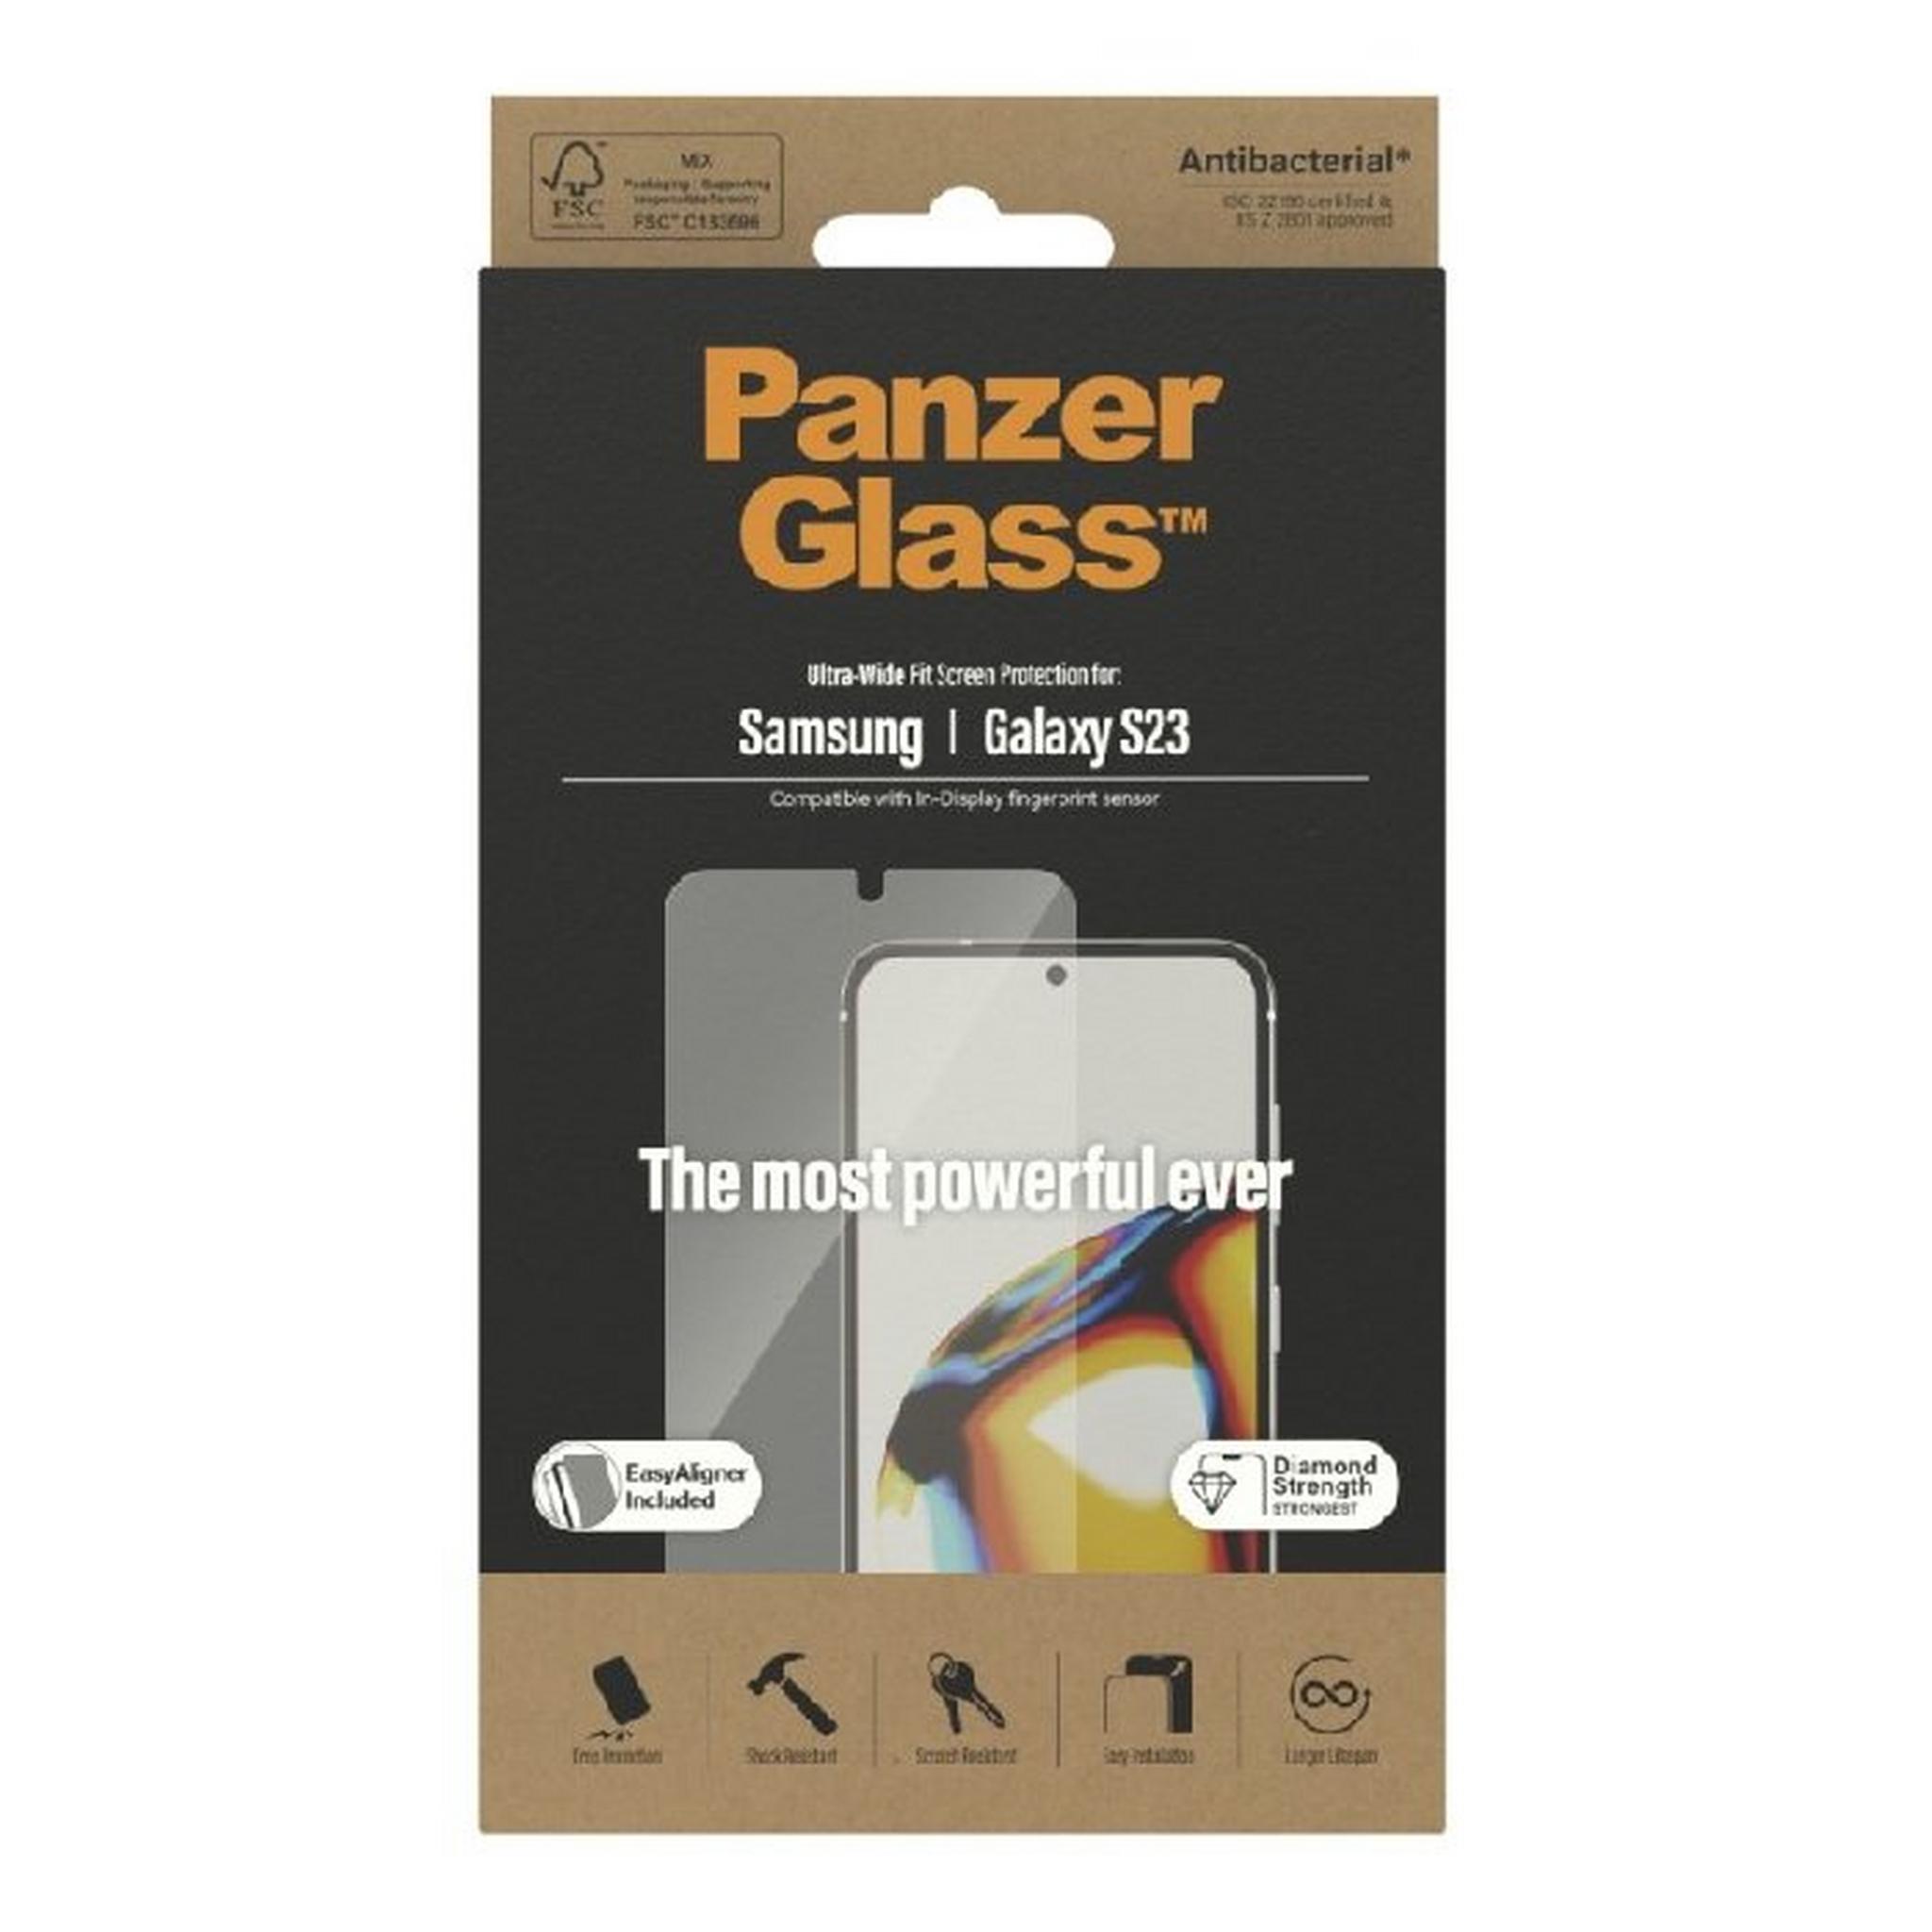 Panzer Ultra-Wide Fit Screen Protector for Samsung Galaxy S 2023, 7315-PG